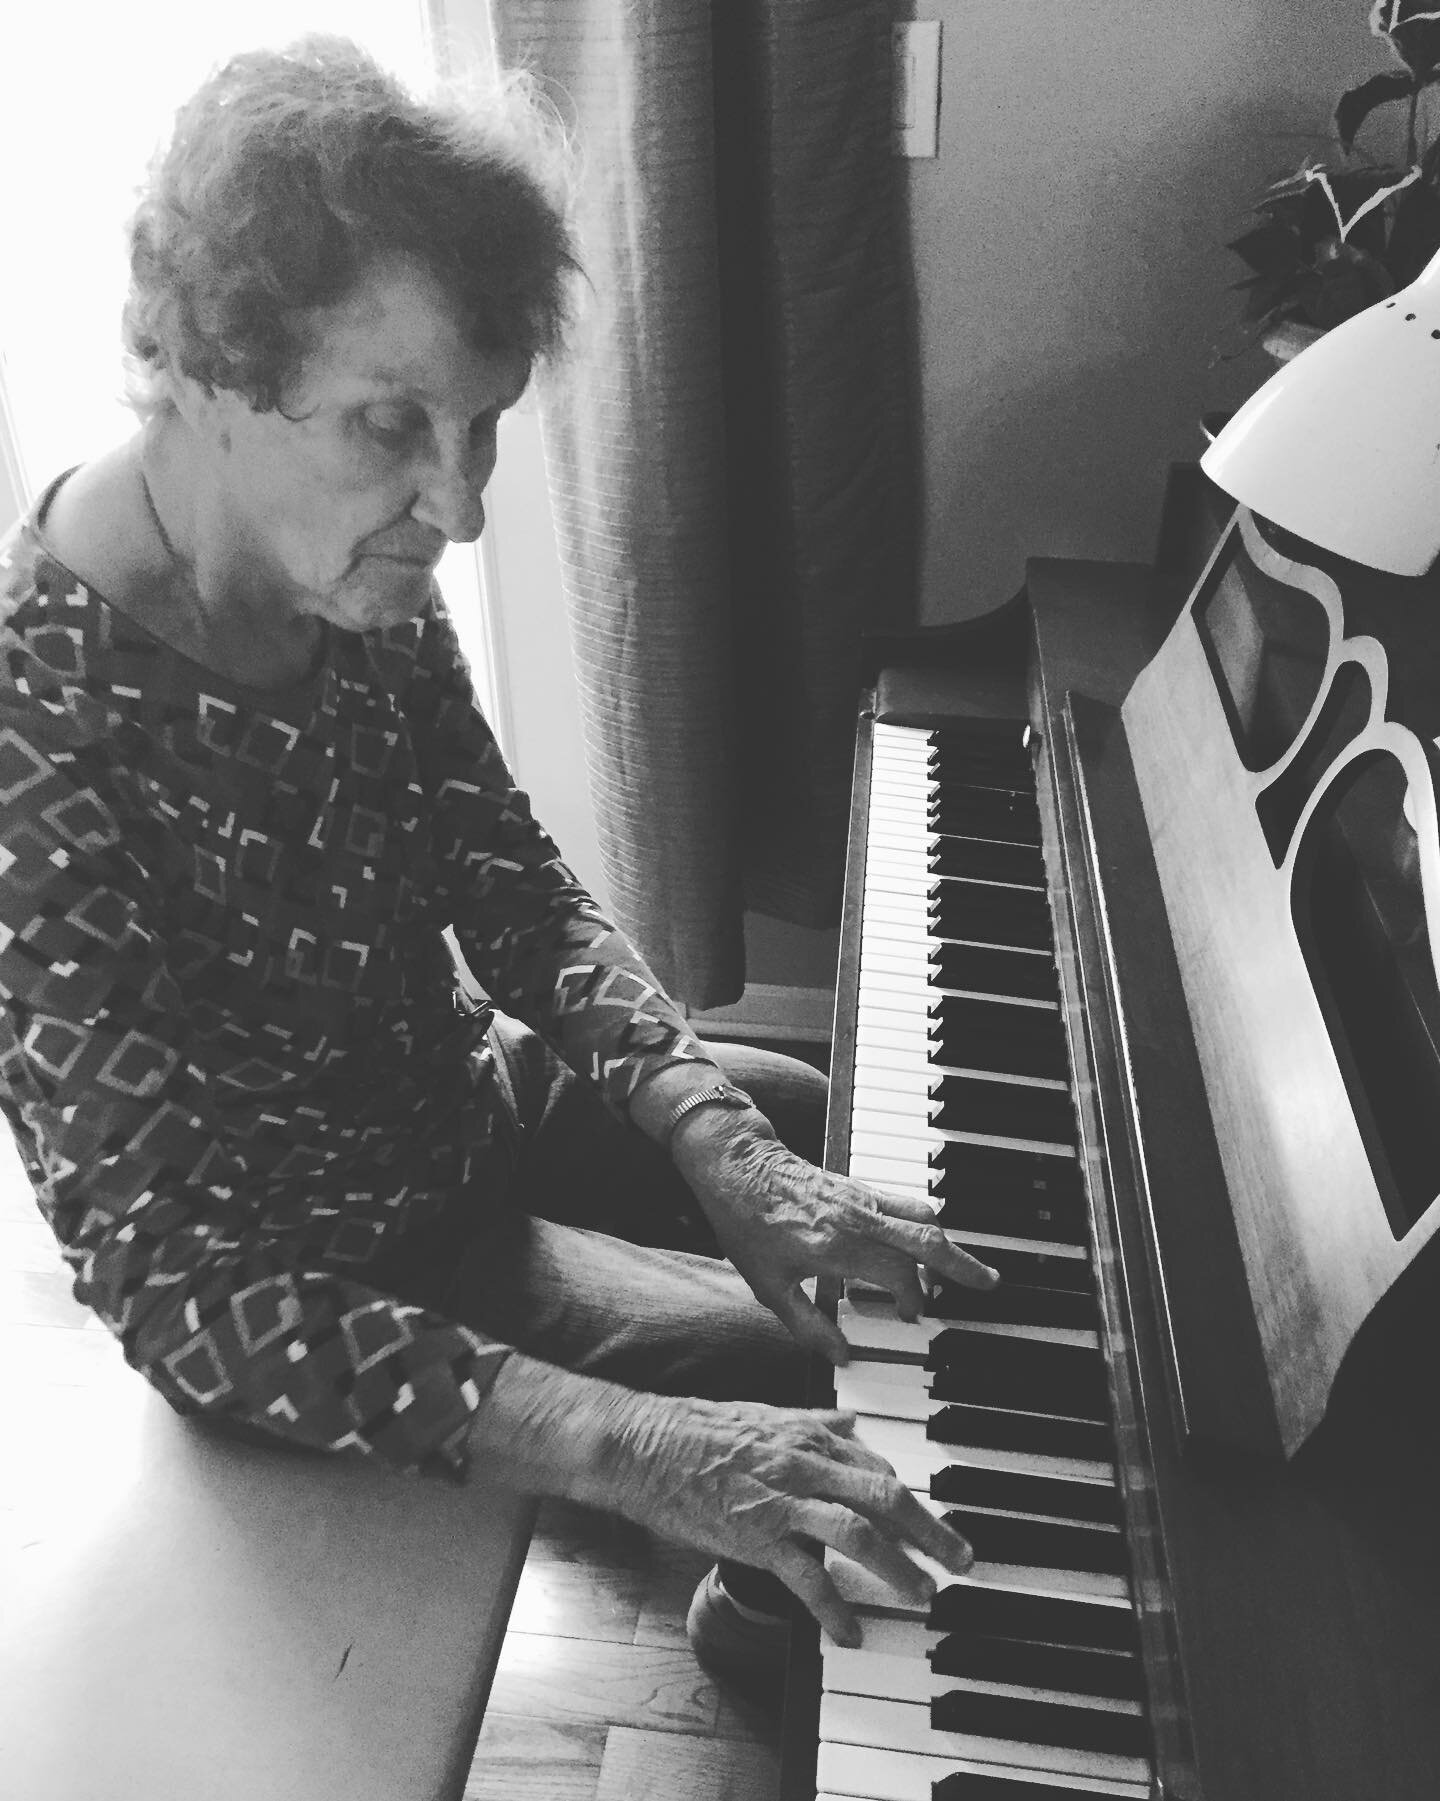 She lit the fire and let me take over her piano when I was a kid. My life forever changed. Looking through pictures of mom and smiling in my heart over the legacy she has, not to just me, but to many other people. So grateful to God for getting to ca